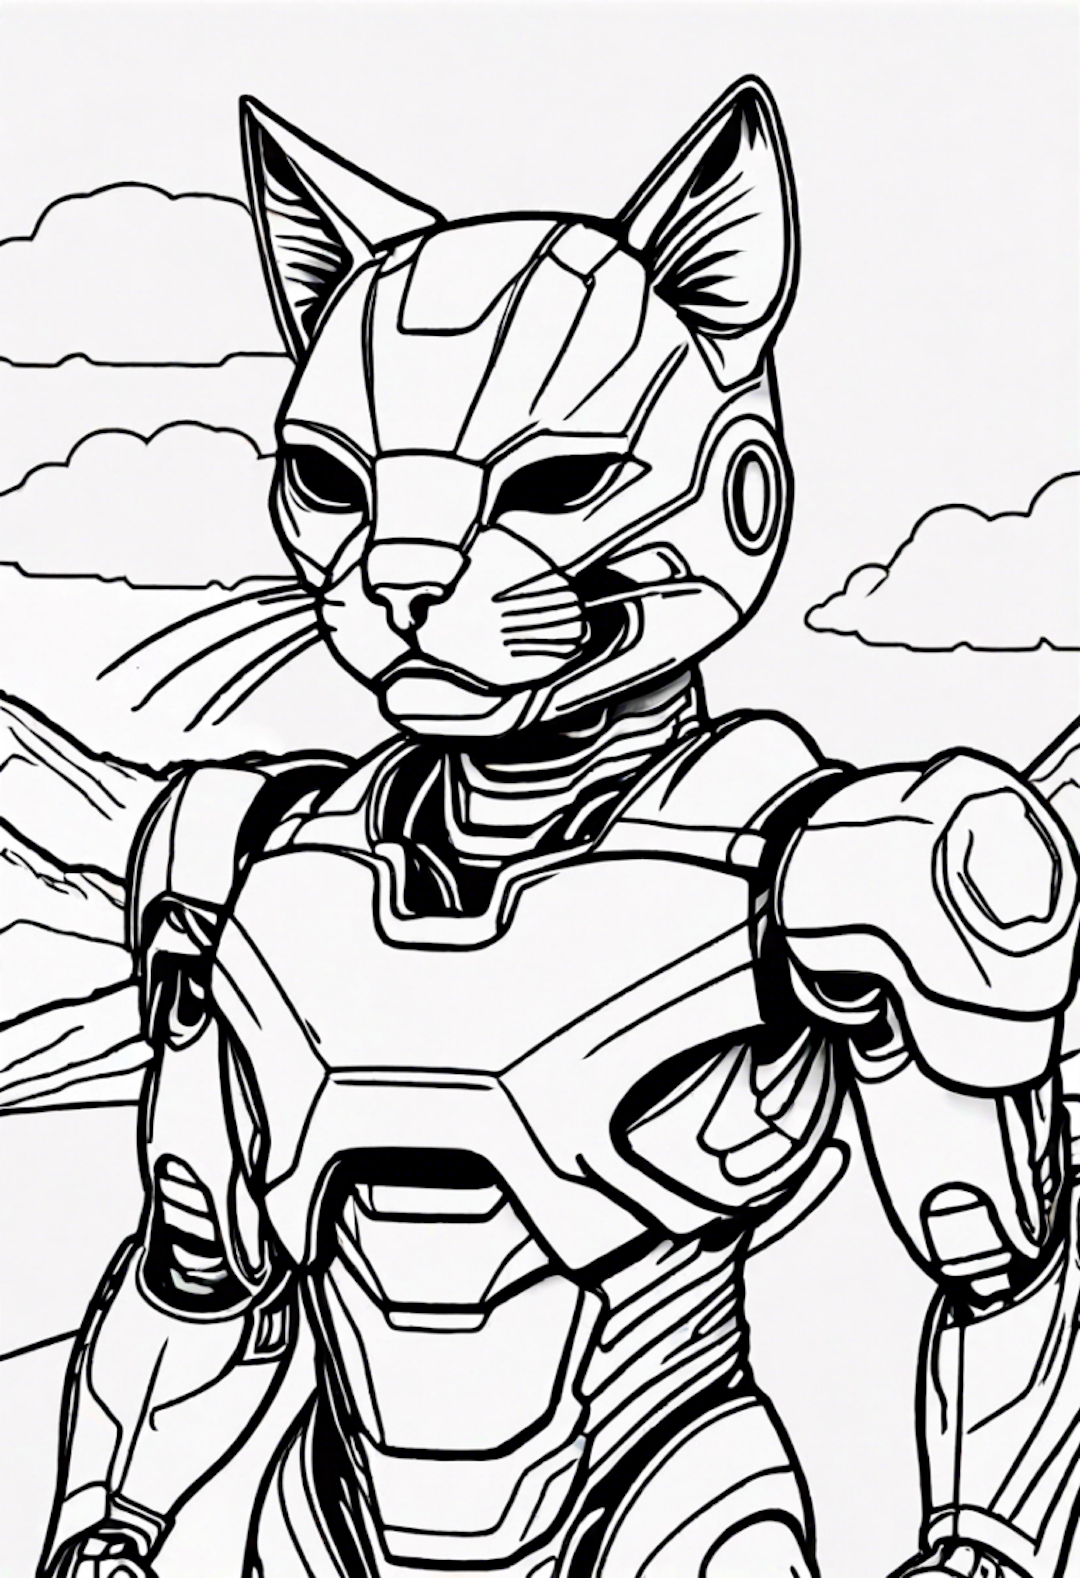 Cyber Feline Warrior Coloring Page coloring pages